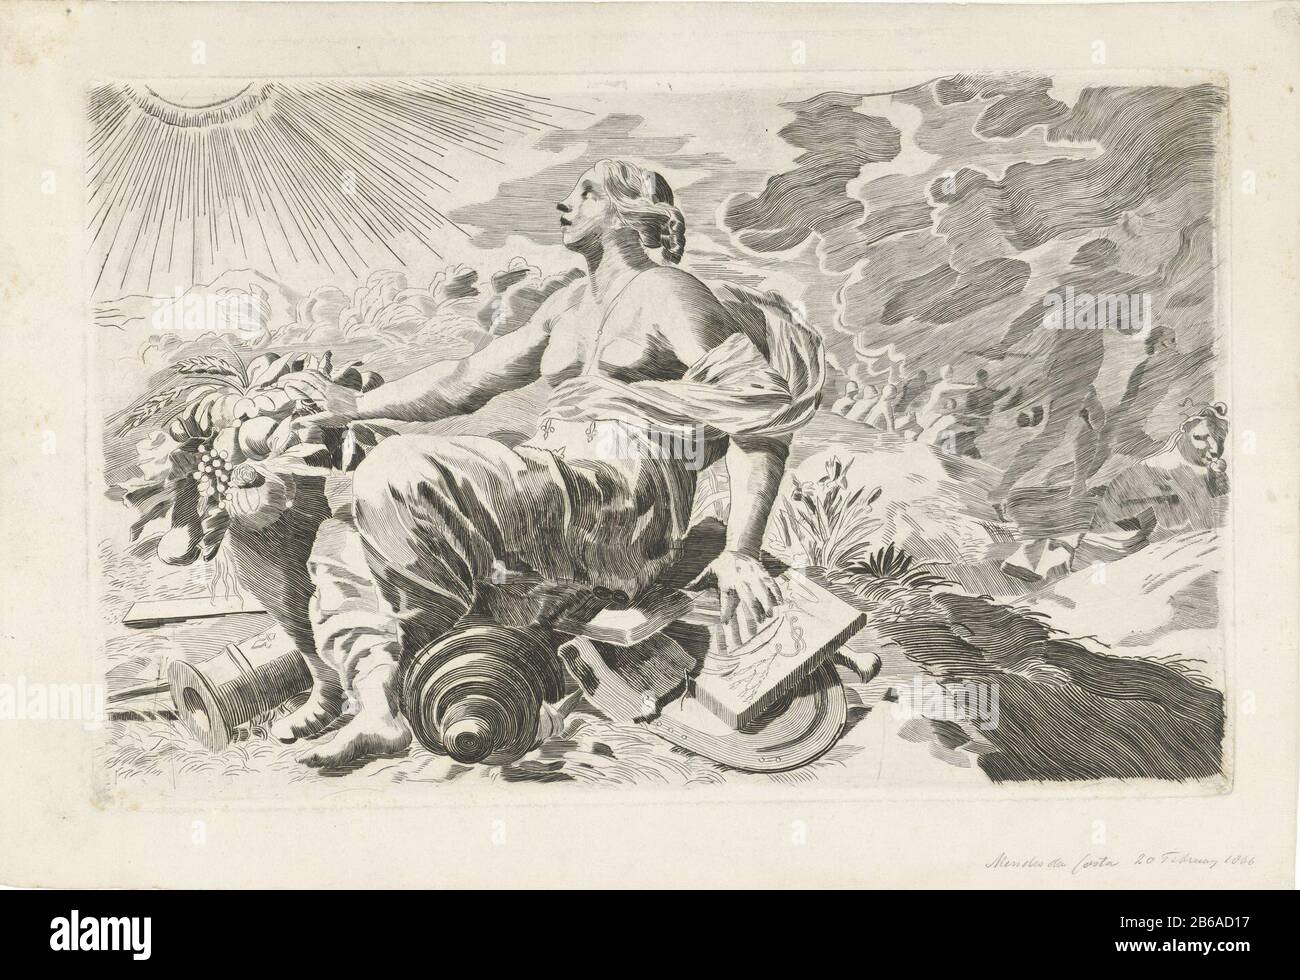 Allegory on the prosperity of a cardinal A woman, the personification of prosperity, is wrapped in a cloth with French lilies sitting on a gun and looking at the sun. Her hand leaning on a stone with an unknown weapon cardinal. In the background the remains of a carved lion and fleeing people between thick rookwolken. Manufacturer : printmaker Samuel Henri Mendes da Costa Place manufacture: Amsterdam Date: 1866 Physical features: etching material: paper Technique: etching Dimensions: plate edge: H 253 mm × W 396 mm Subject: insignia or cardinal, eg hat, mantleWelfare, Prosperity; 'Felicità pub Stock Photo